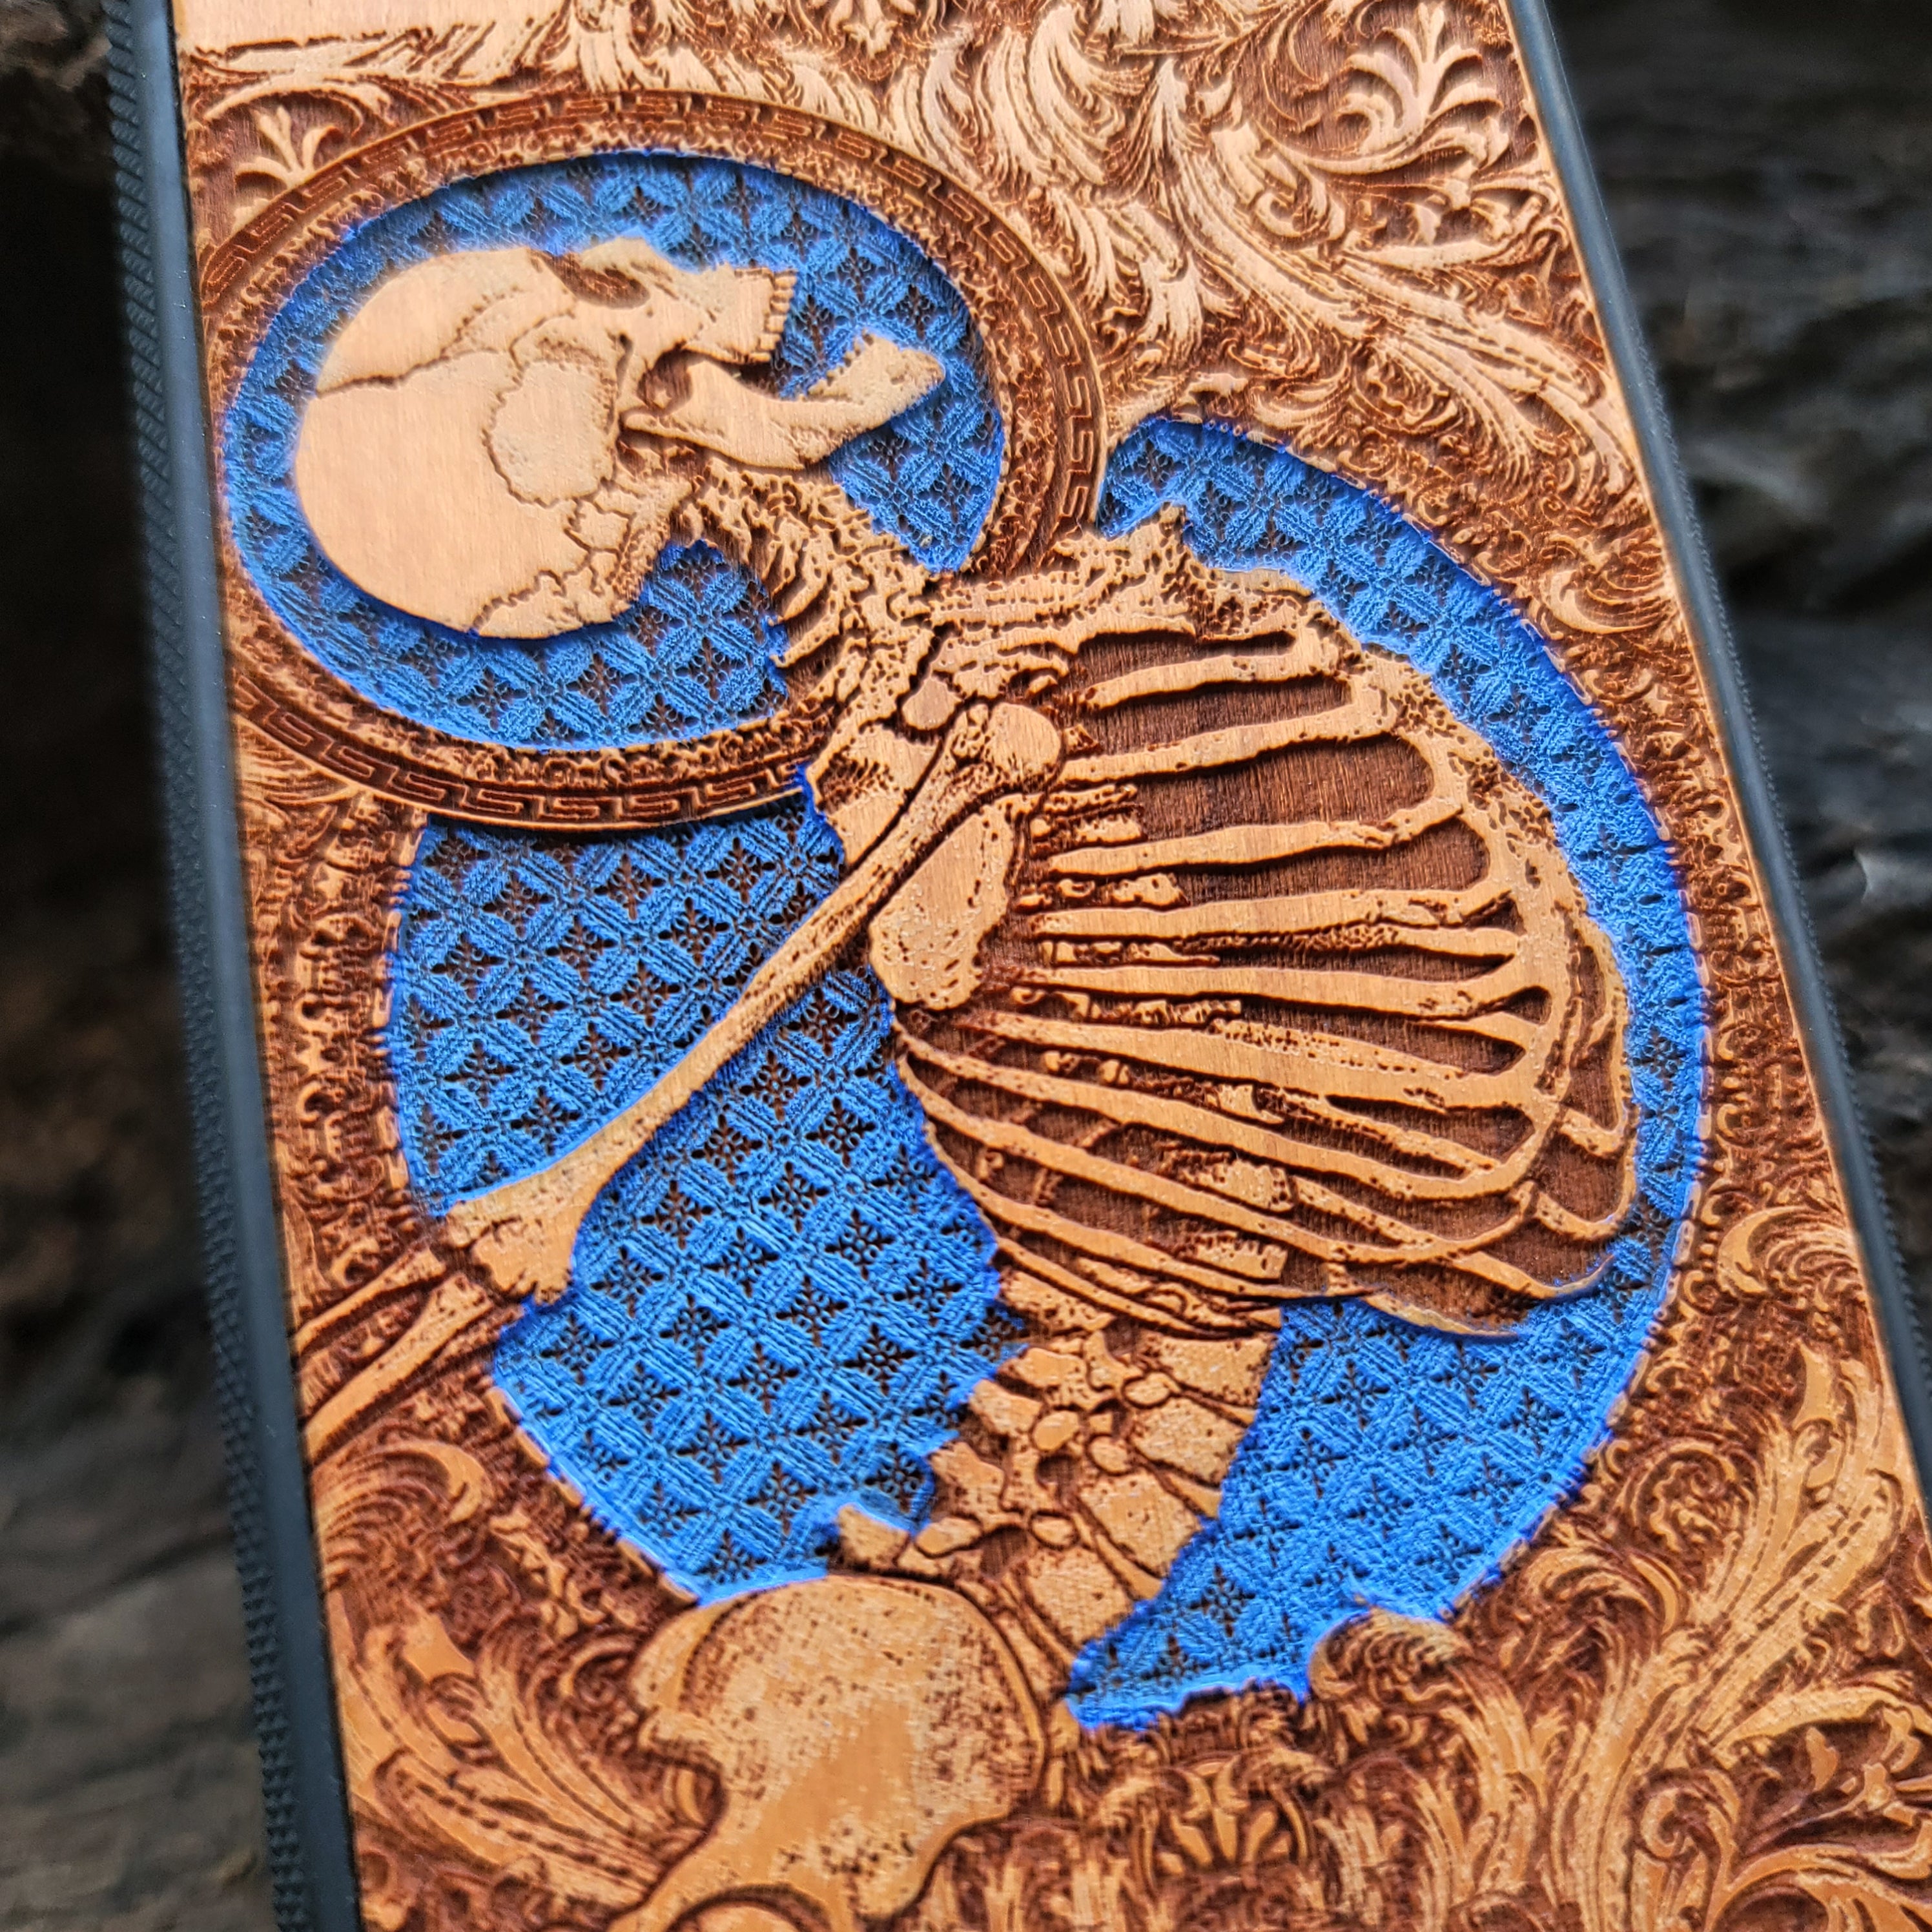 iPhone & Samsung Galaxy Wood Phone Case - Human Skeleton Blue Gothic Pattern Hand Painted